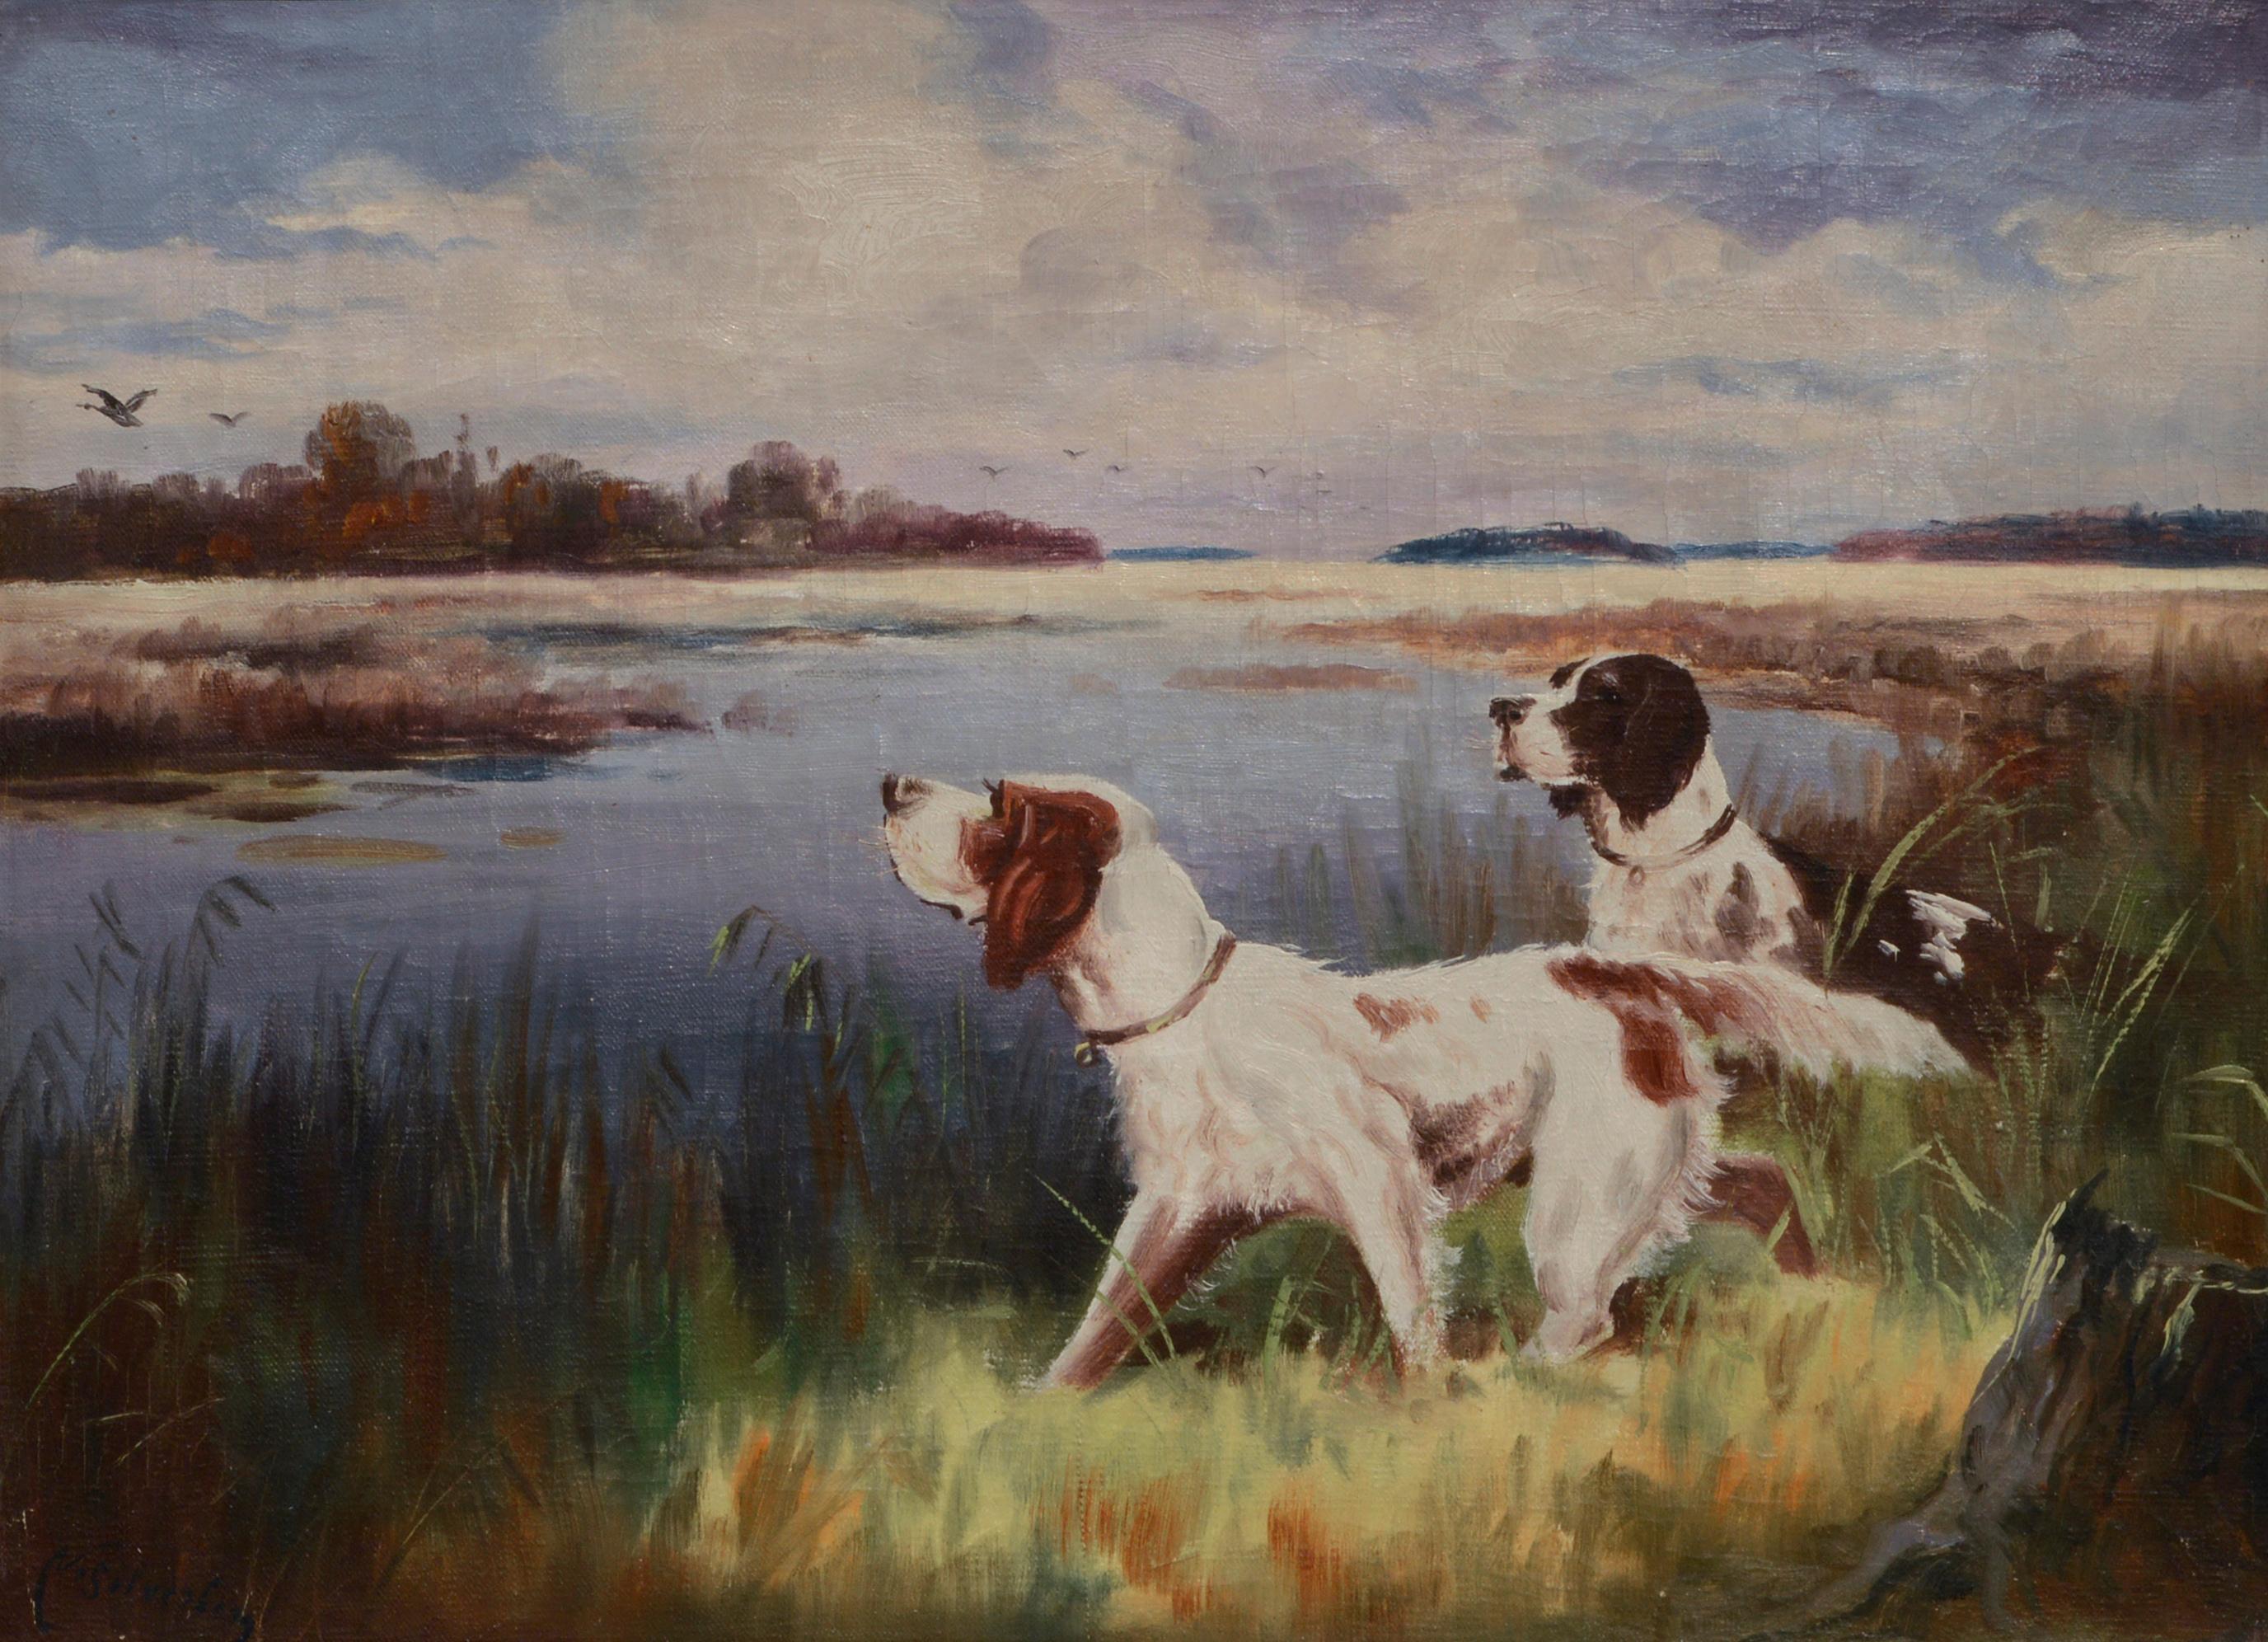 Hunting Dogs by the Lake - Landscape - Painting by Nikolai Silverberg